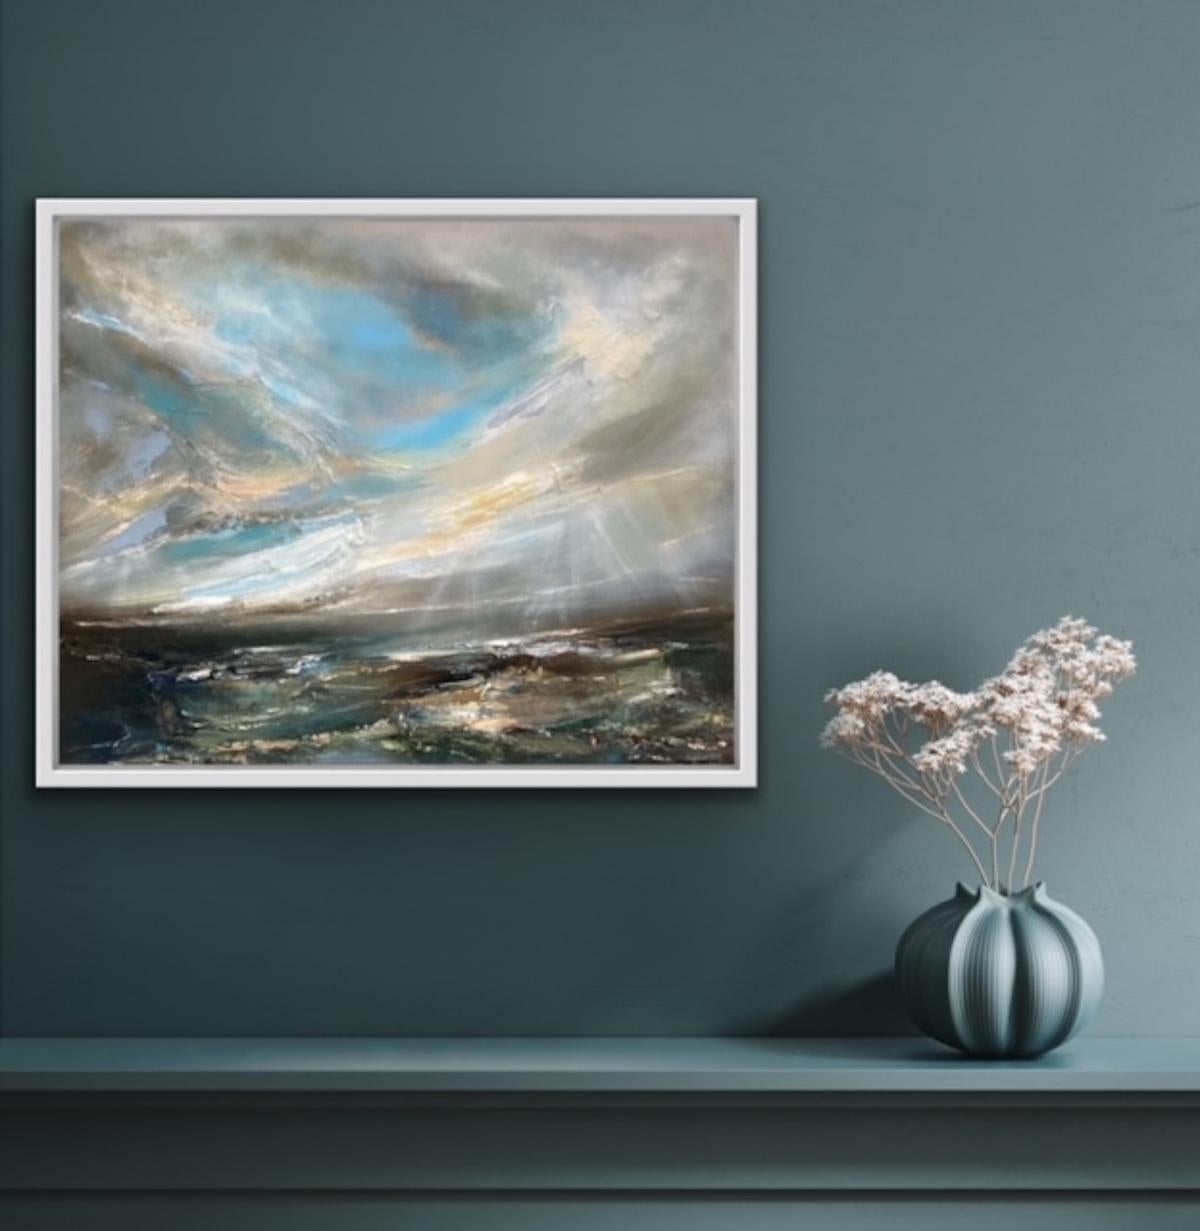 Autumn Skies by Helen Howells [2021]

original
Oil on Canvas
Image size: H:61 cm x W:76 cm
Complete Size of Unframed Work: H:3.5 cm x W:61 cm x D:76cm
Sold Unframed
Please note that insitu images are purely an indication of how a piece may